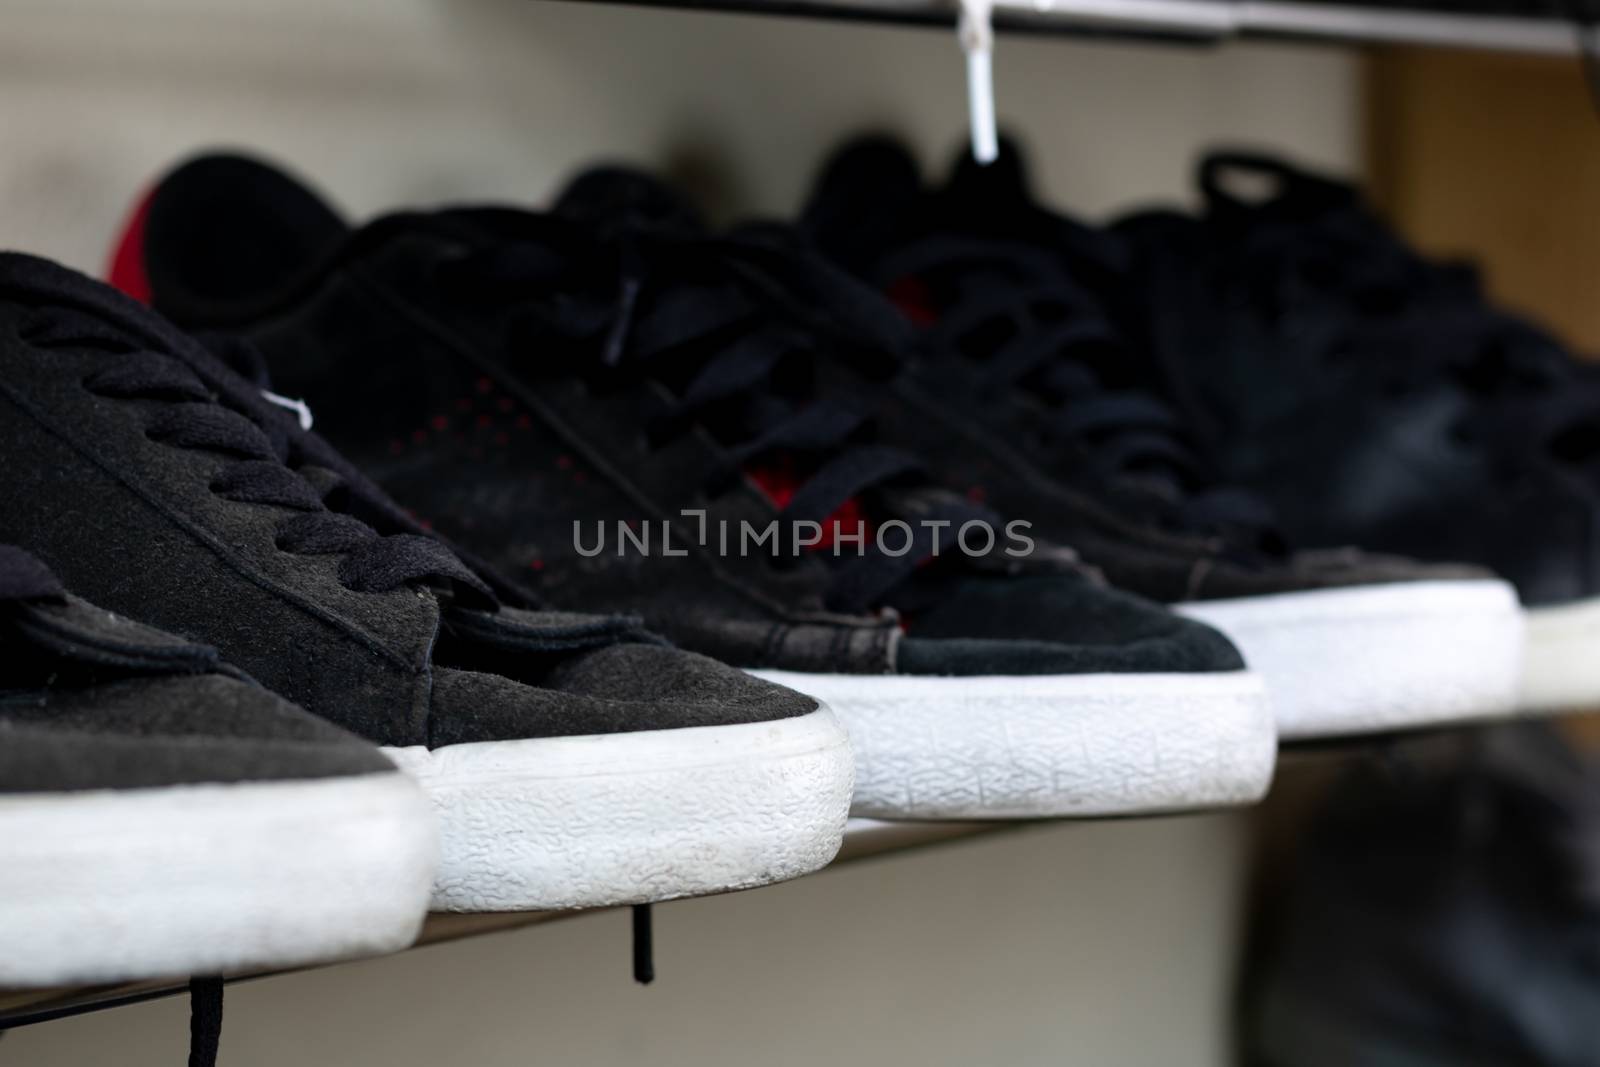 Old pairs of black sneakers on a shoe rack